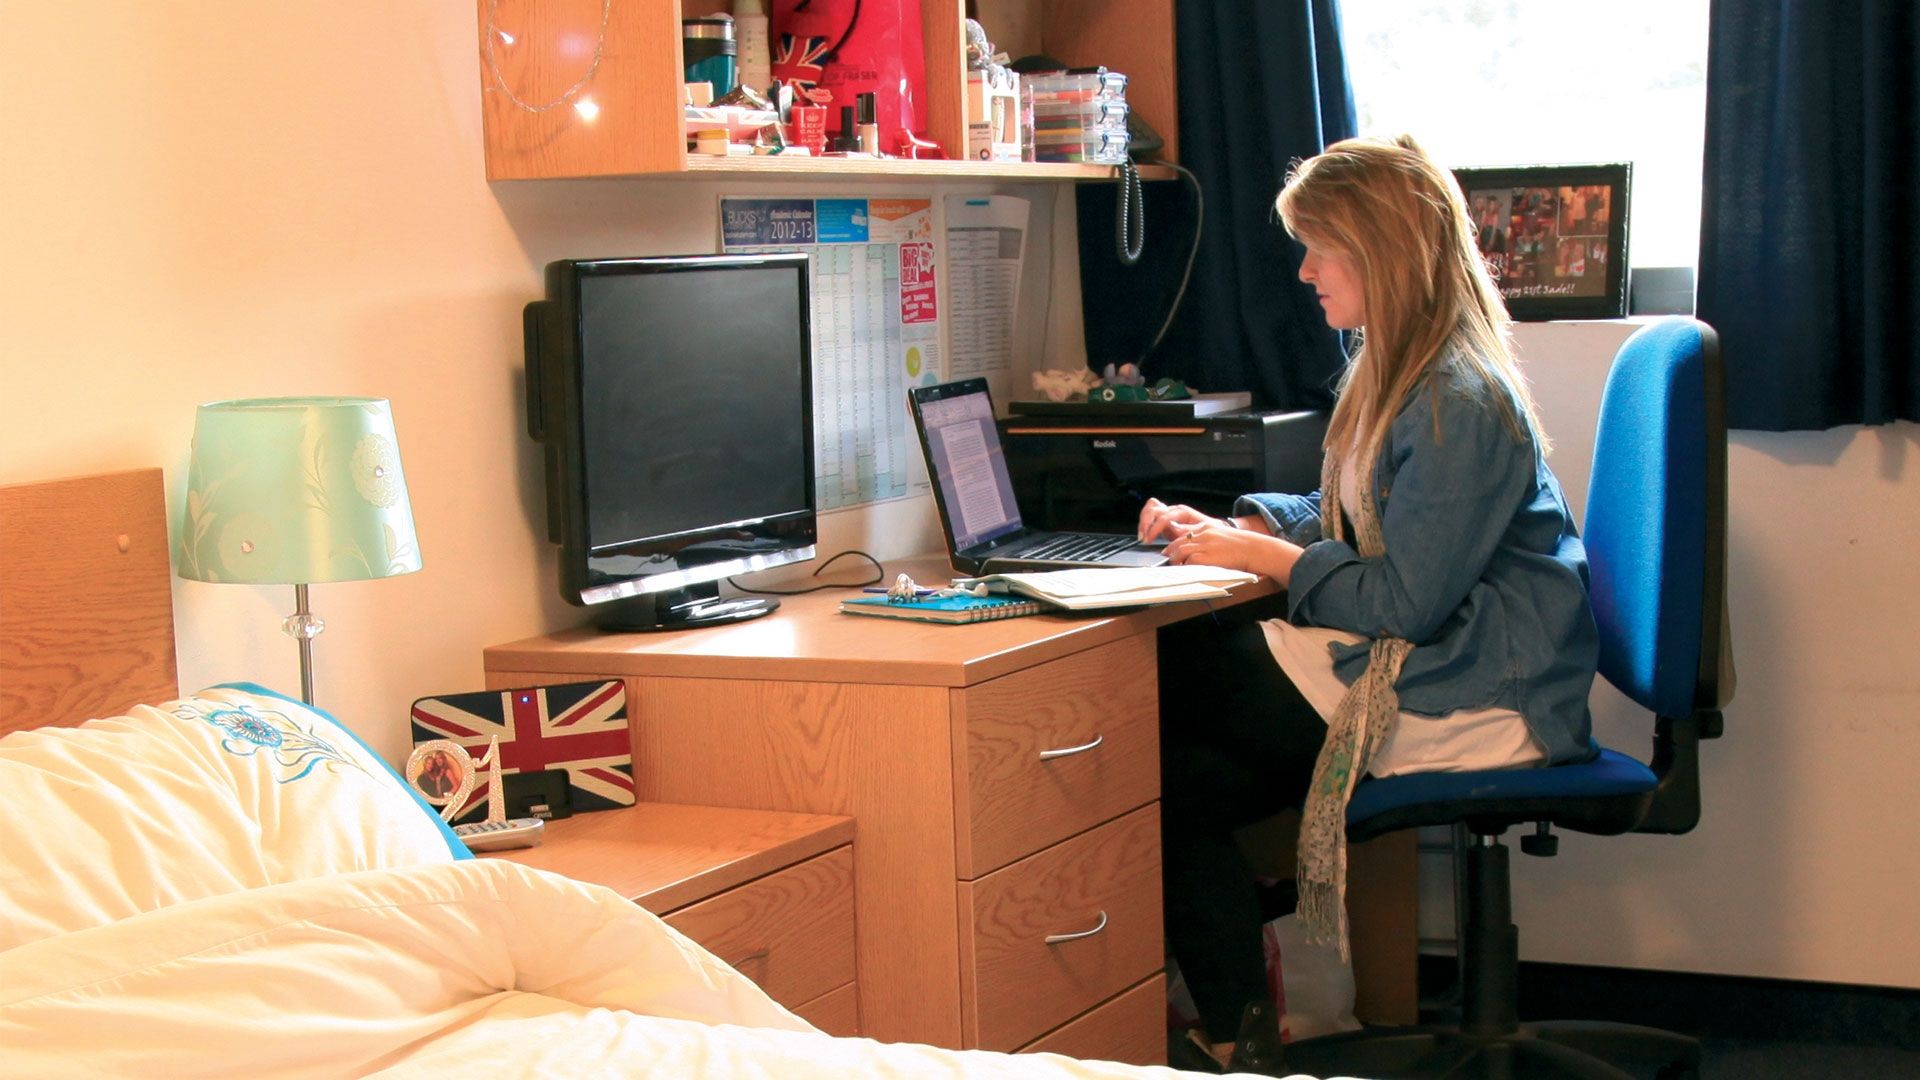 Bucks student sitting at her desk in bedroom student accommodation